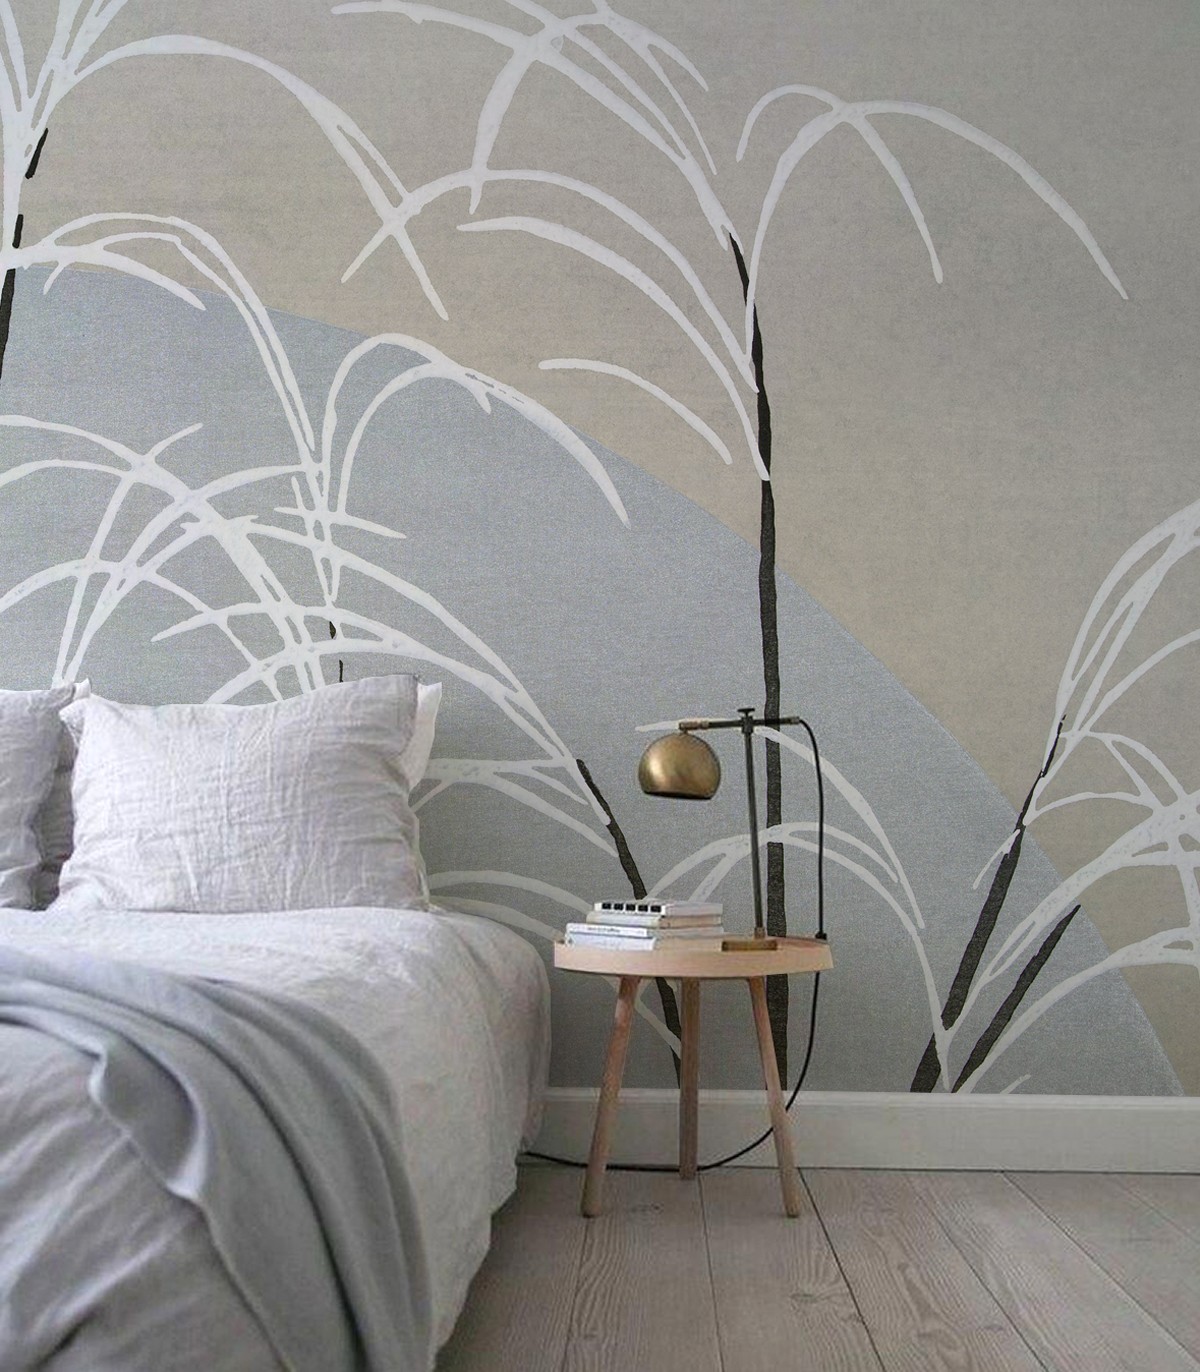 Bedroom Wallpaper Ideas 2023 - Stunning Things To Try - Opptrends 2023